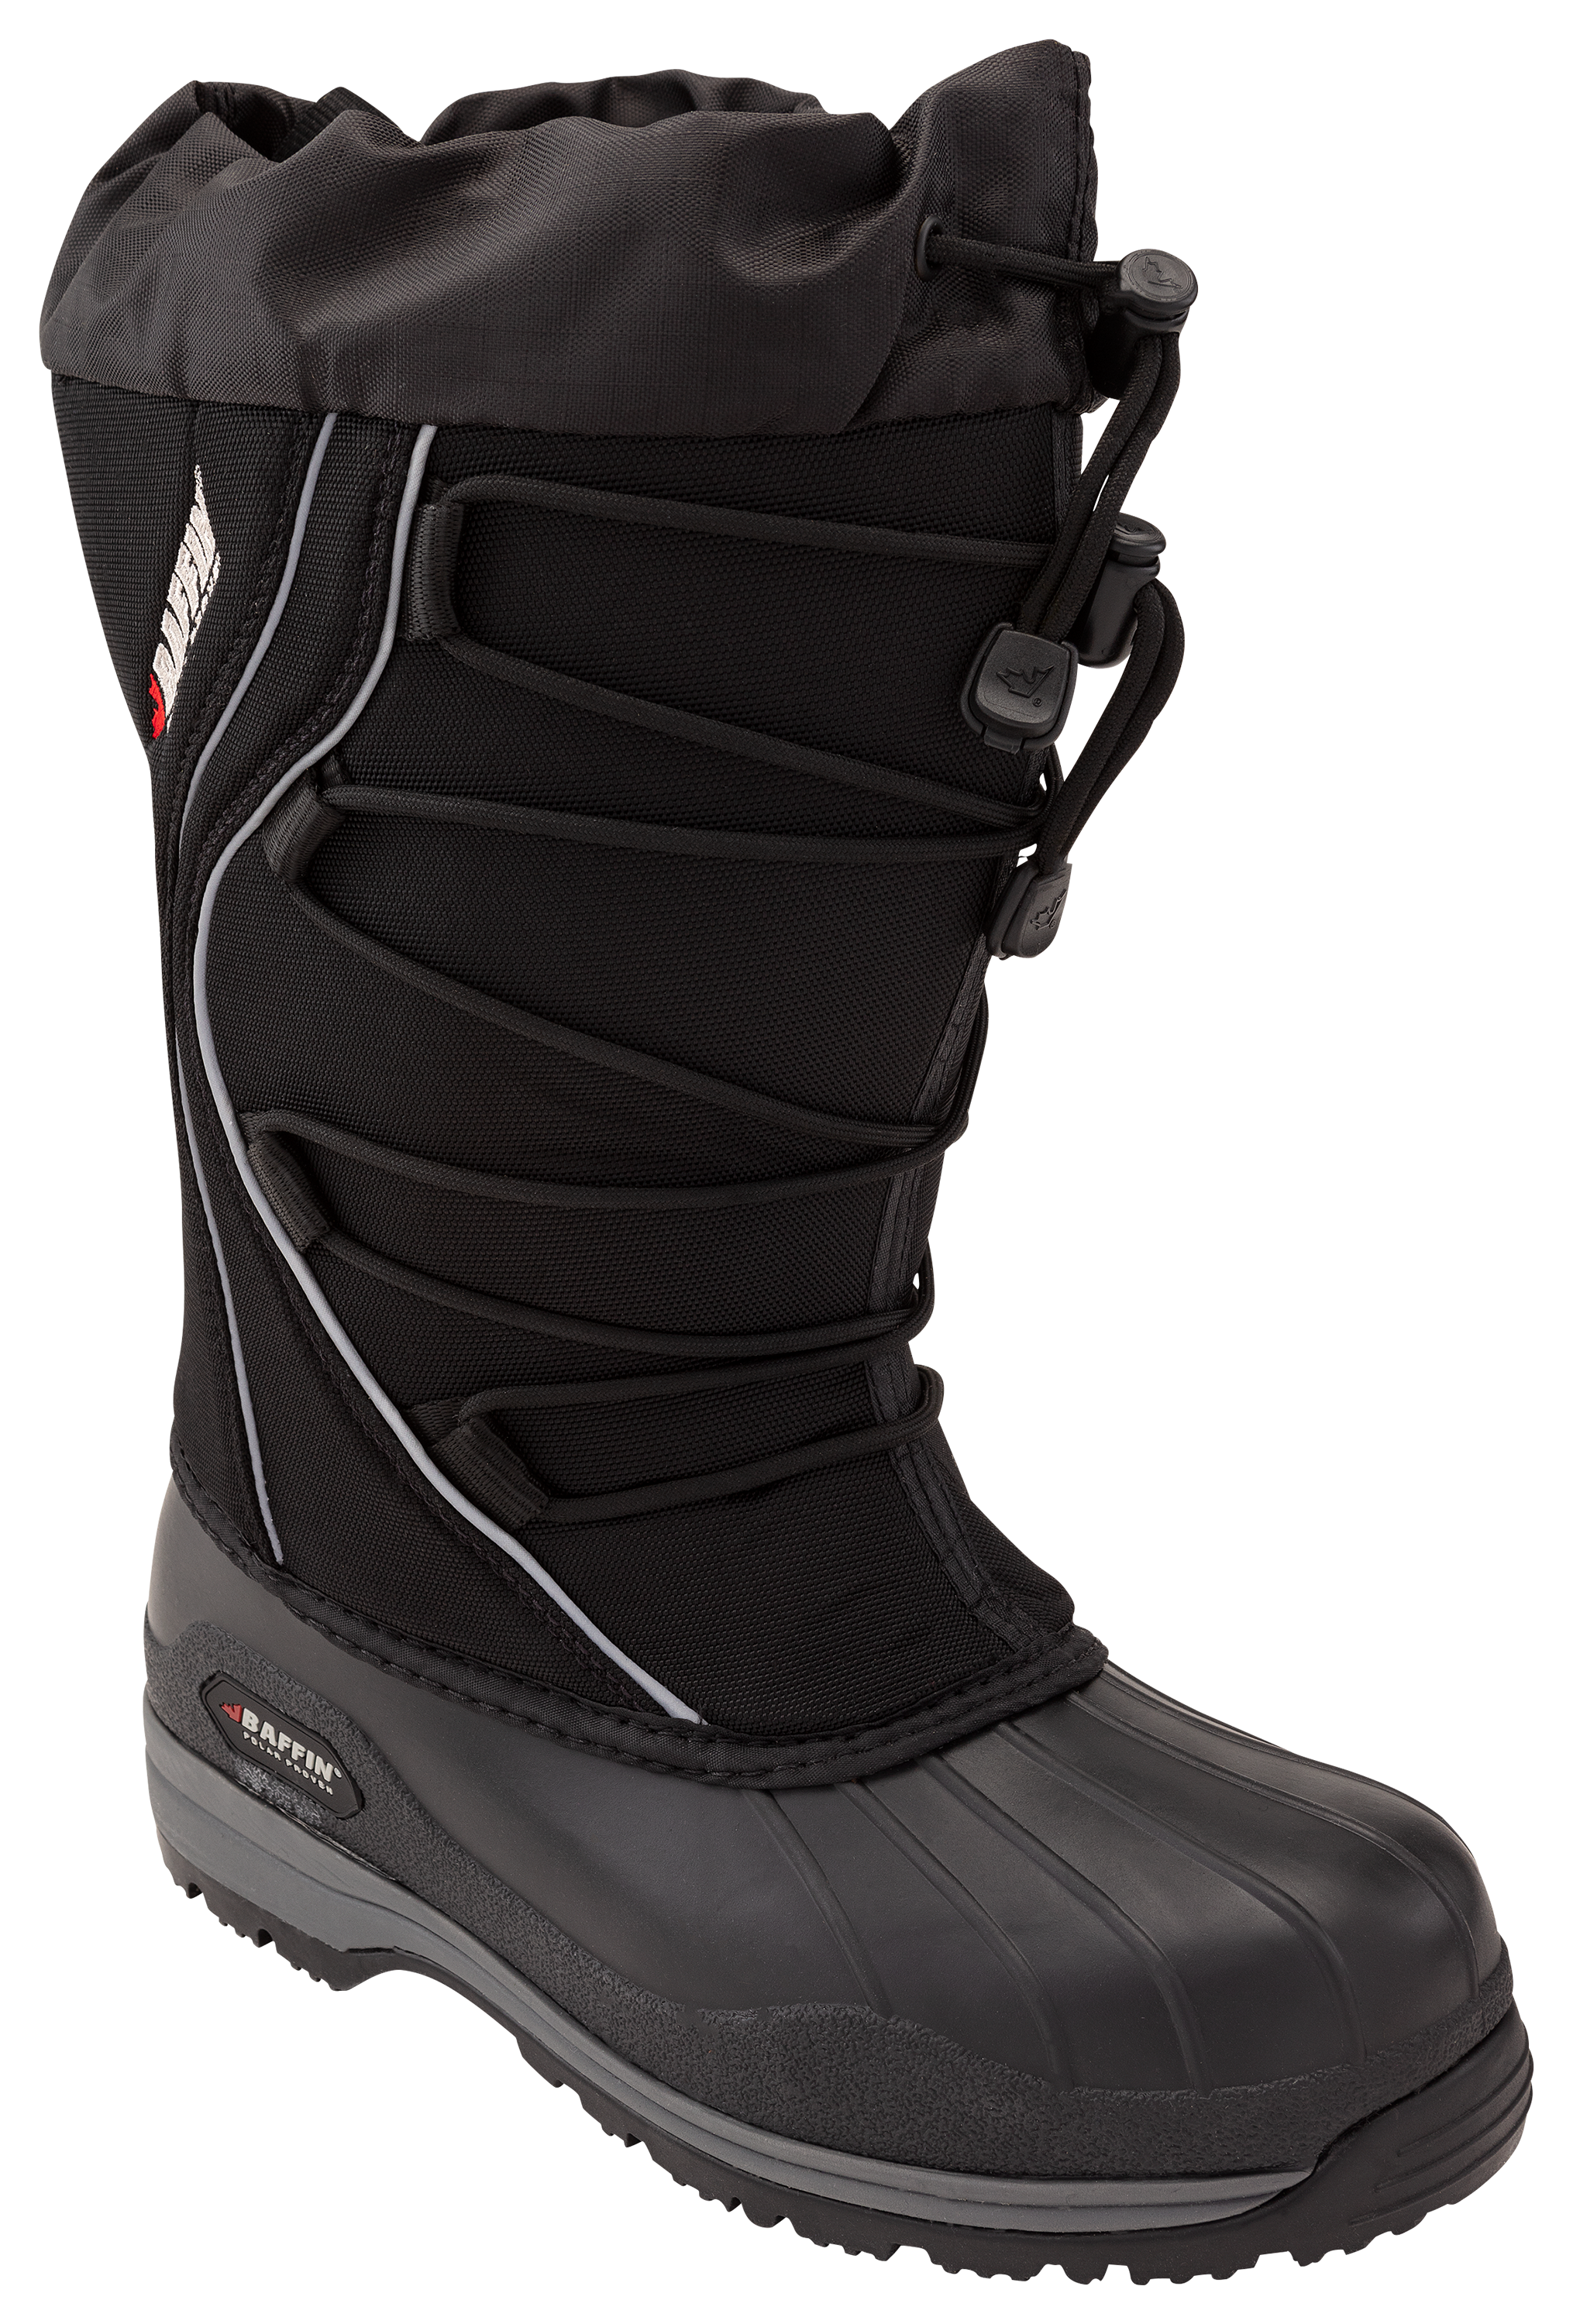 Baffin Icefield Pac Boots for Ladies - Black - 7M